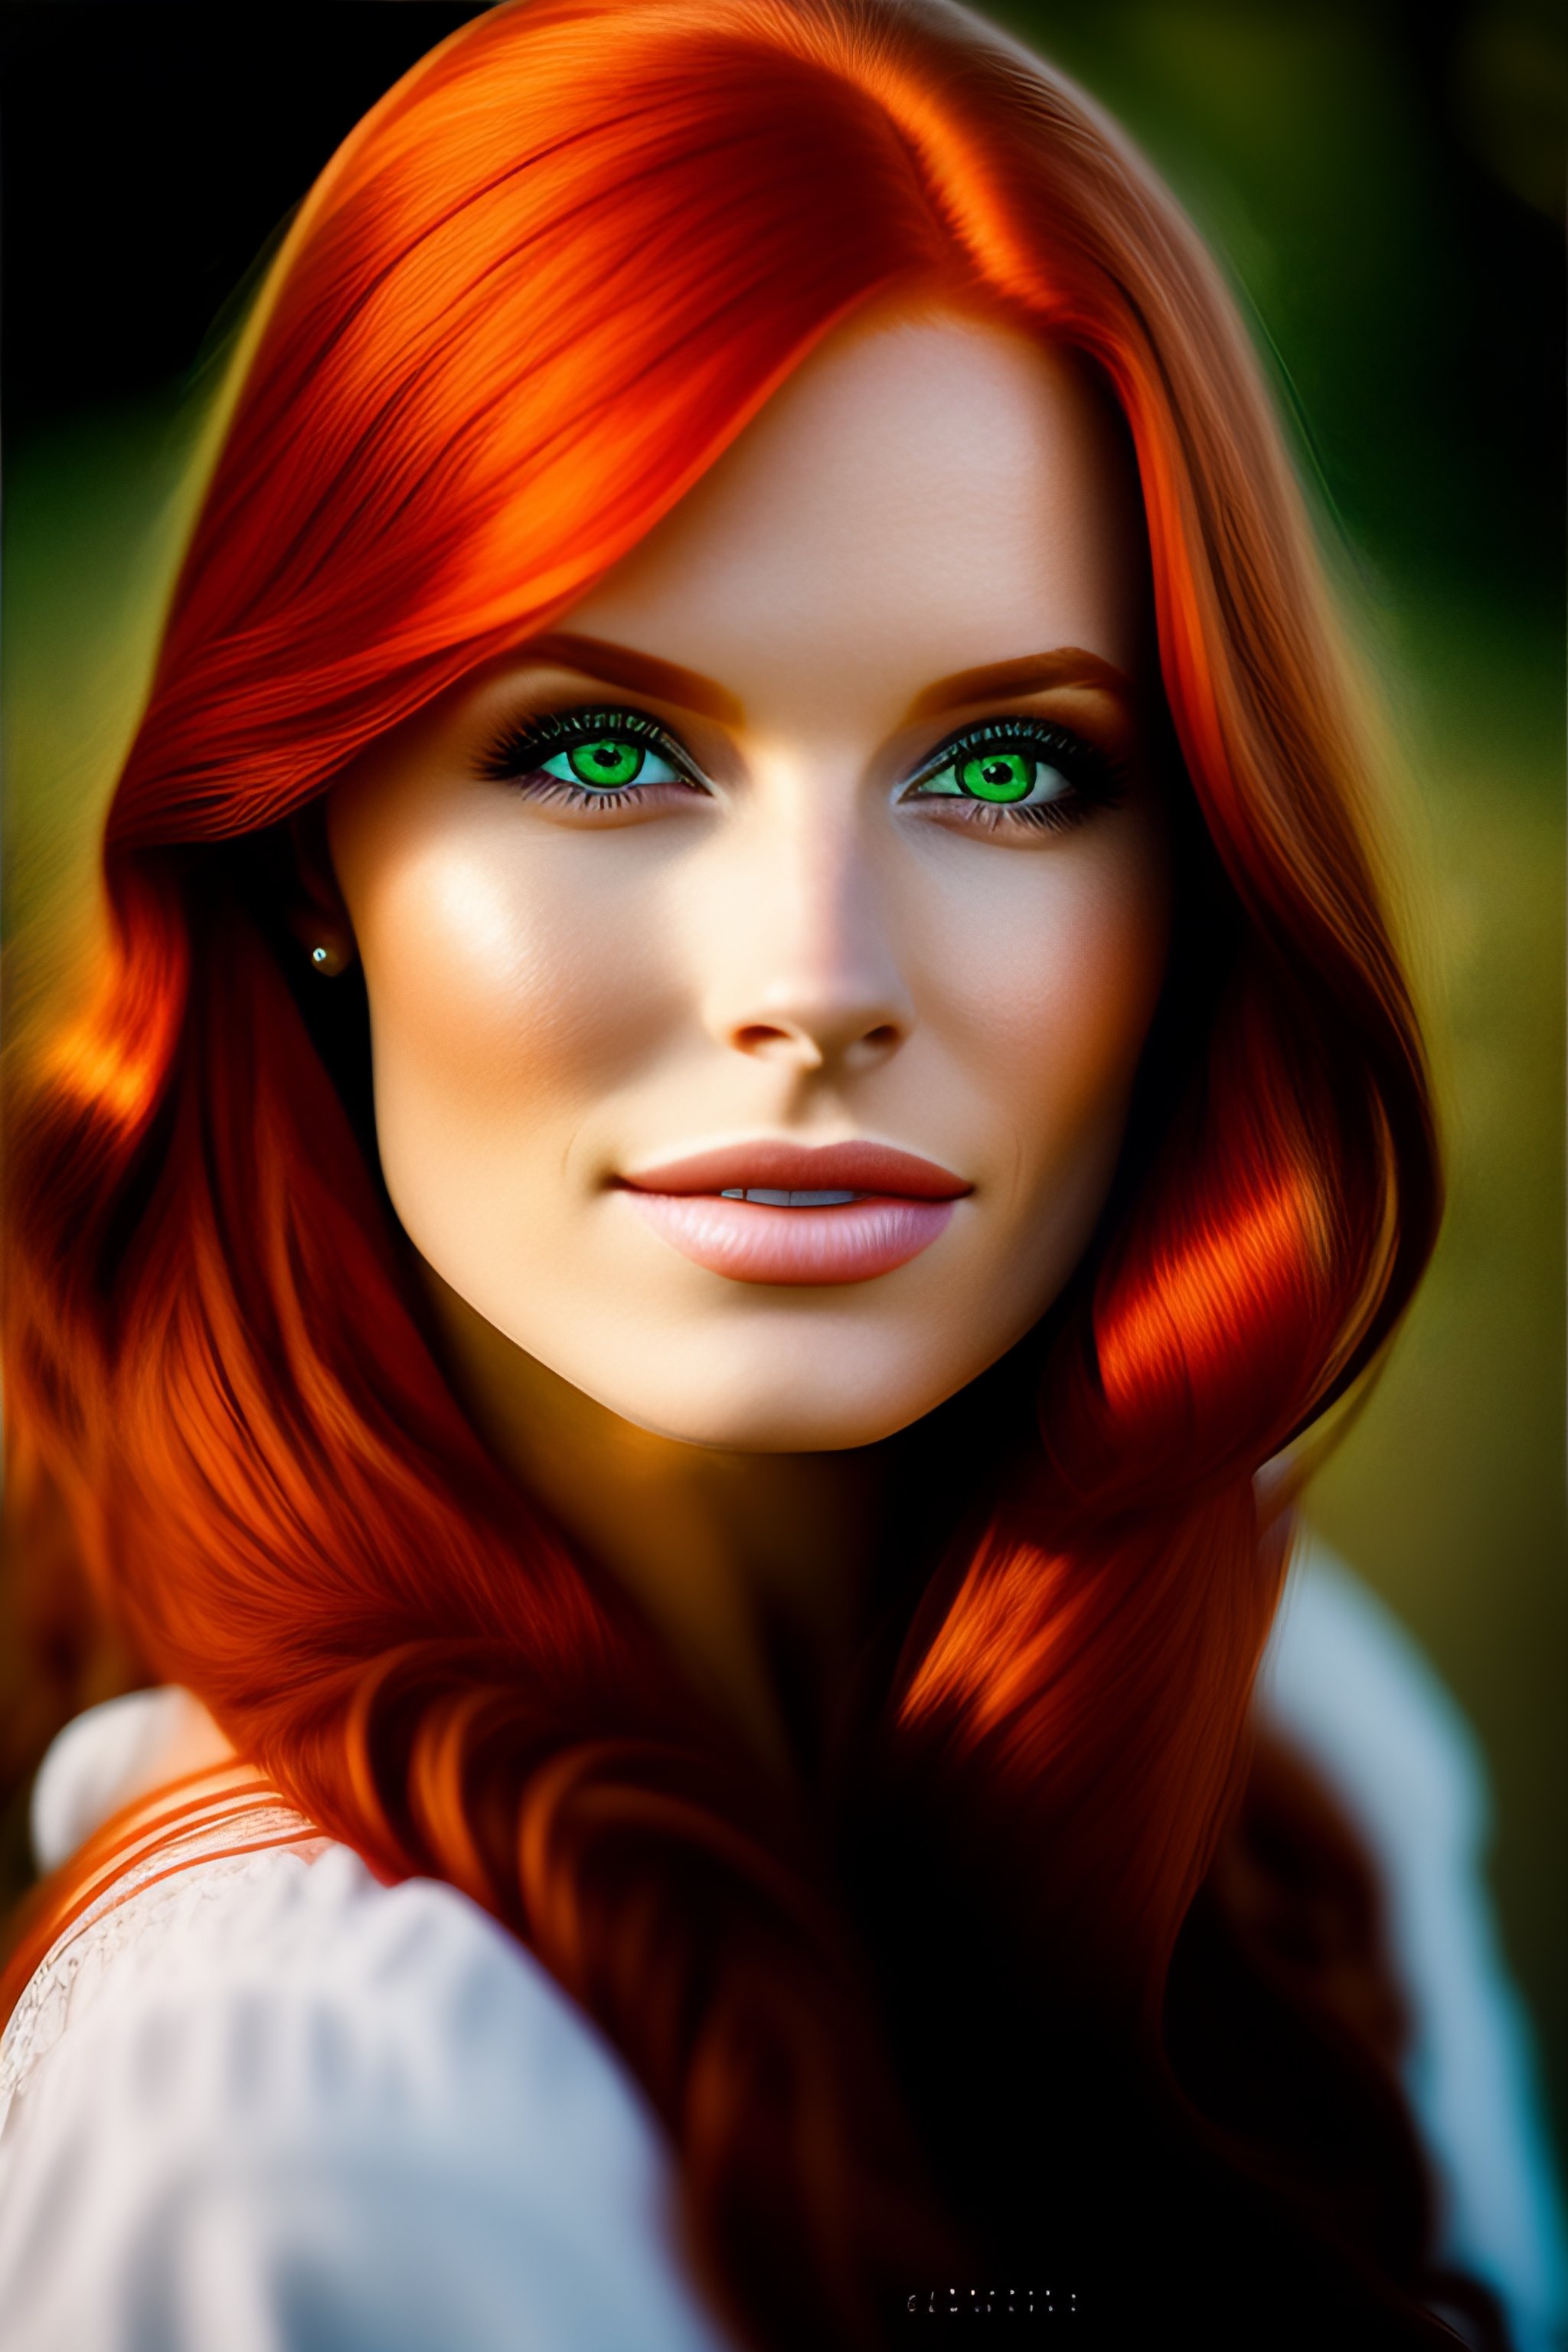 corey freed recommends Redhead Woman With Green Eyes